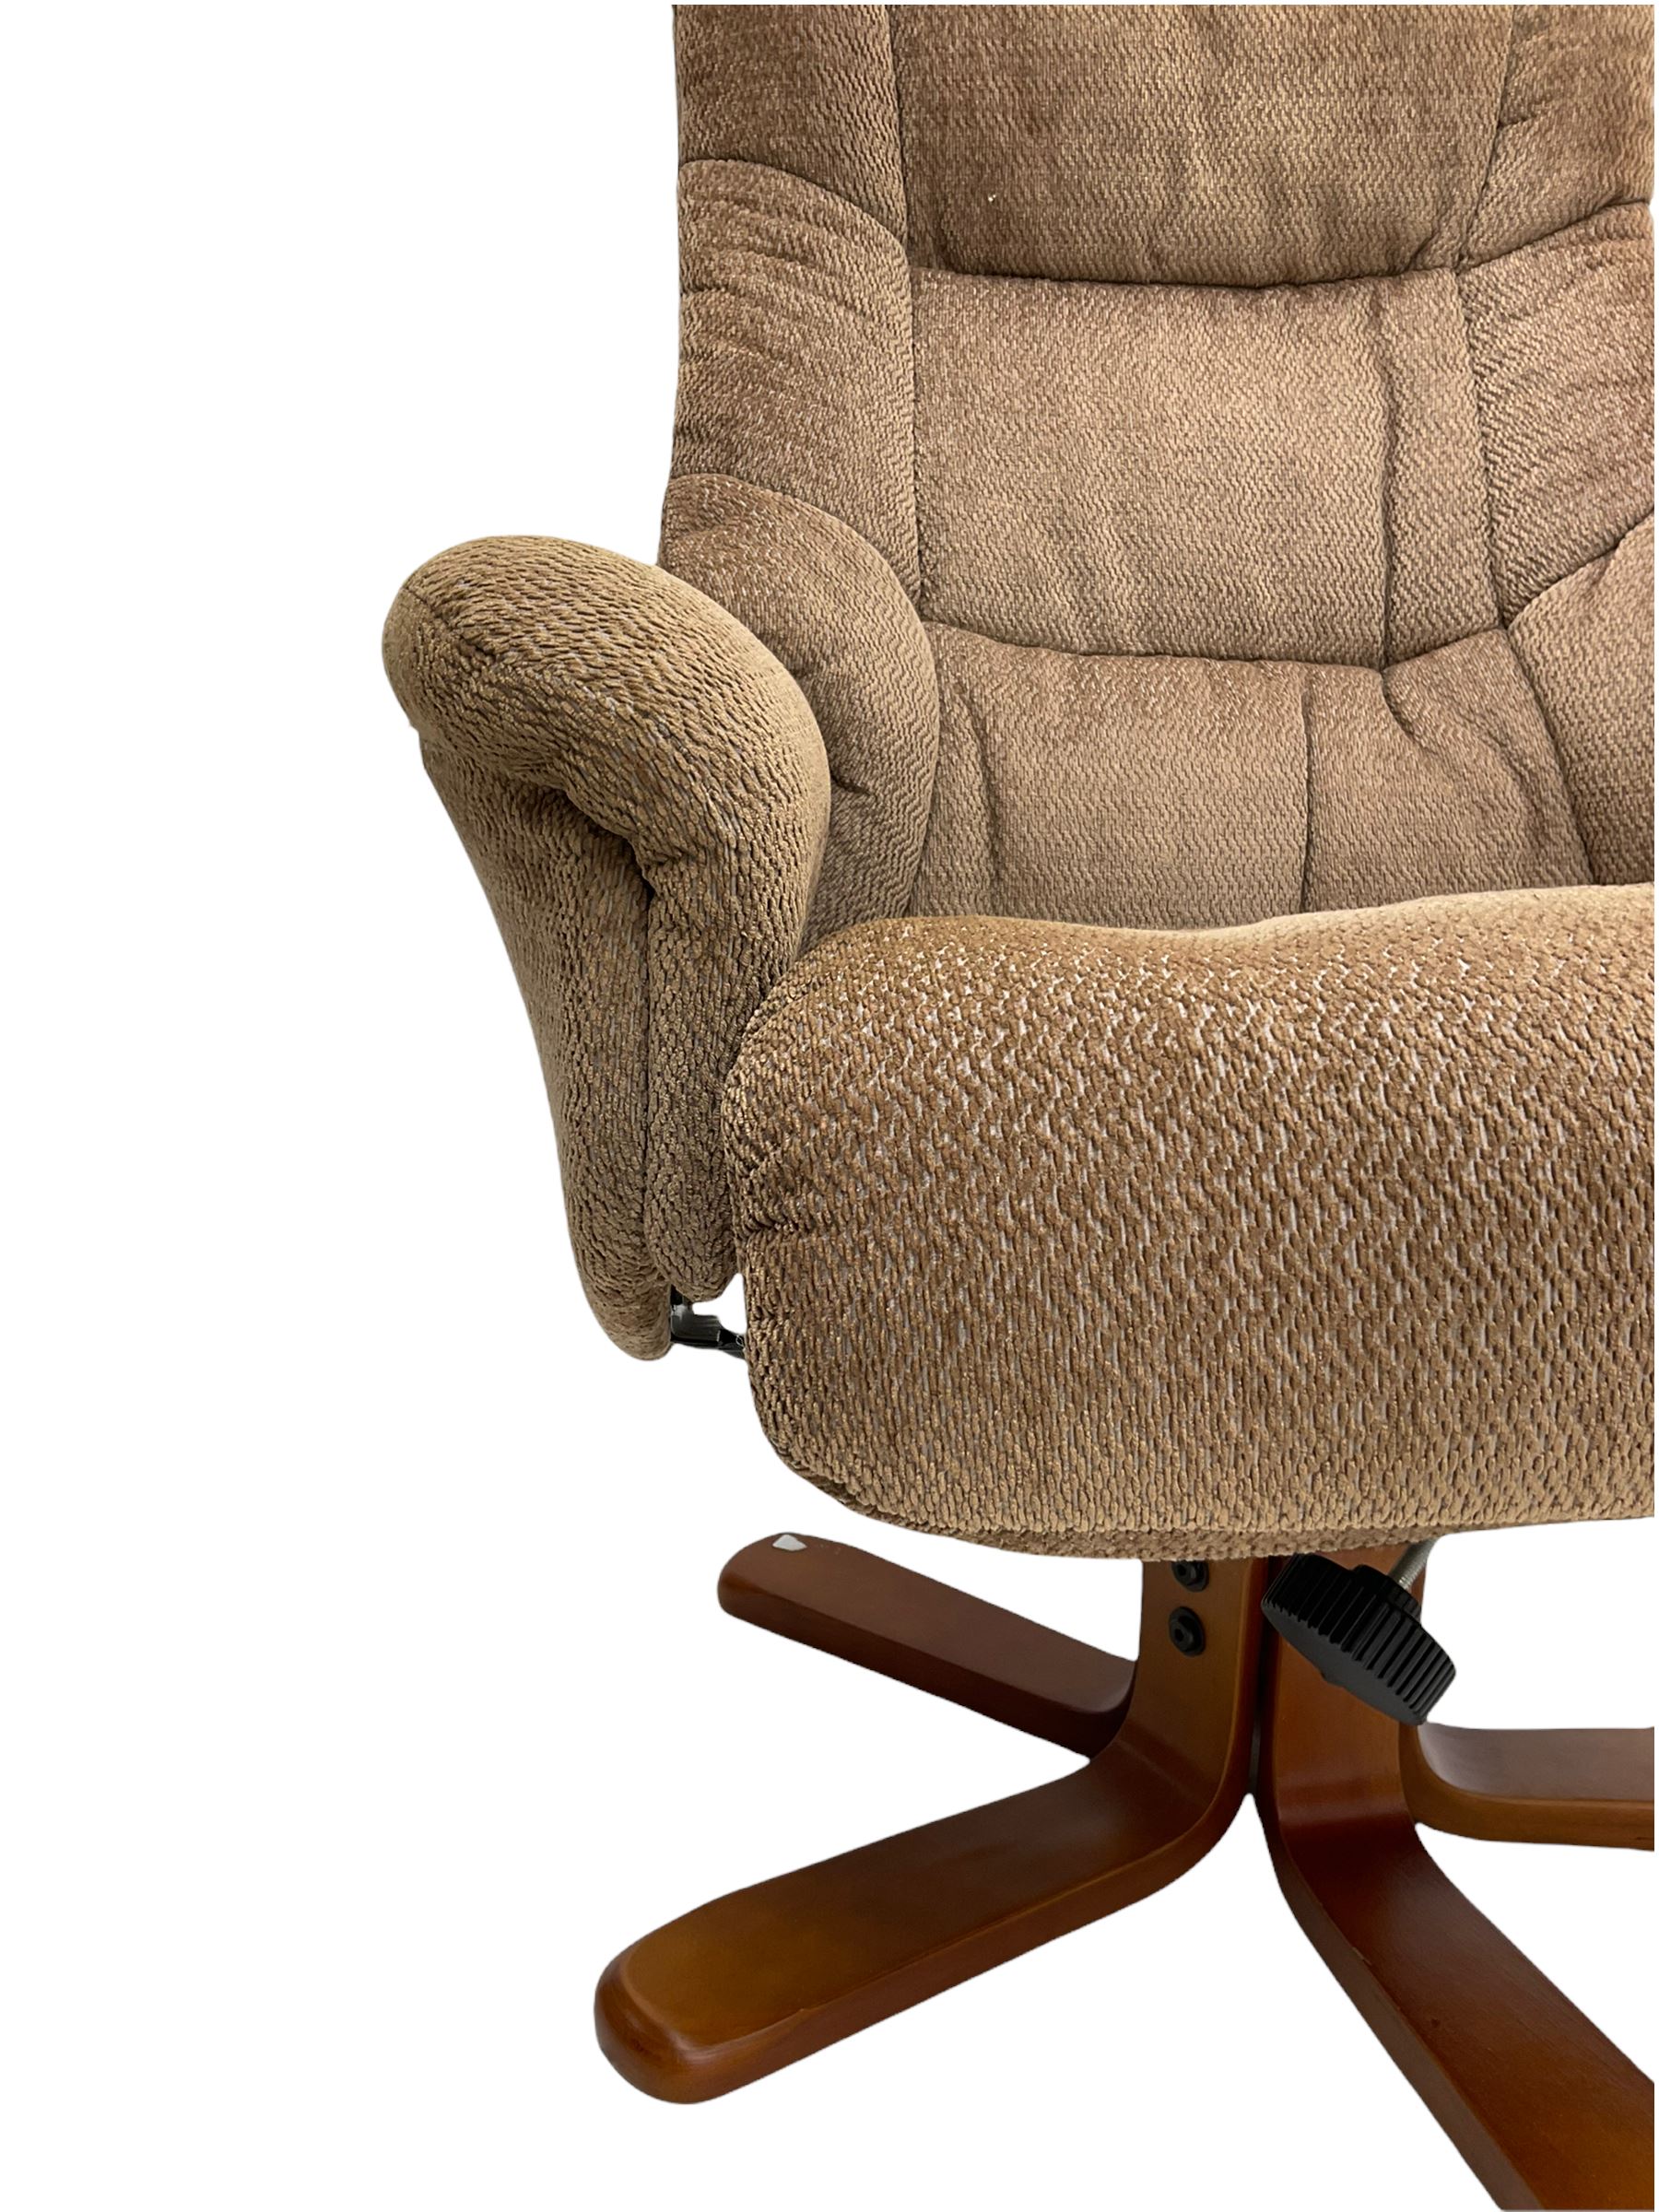 Contemporary lounge chair with matching footstool - Image 11 of 14